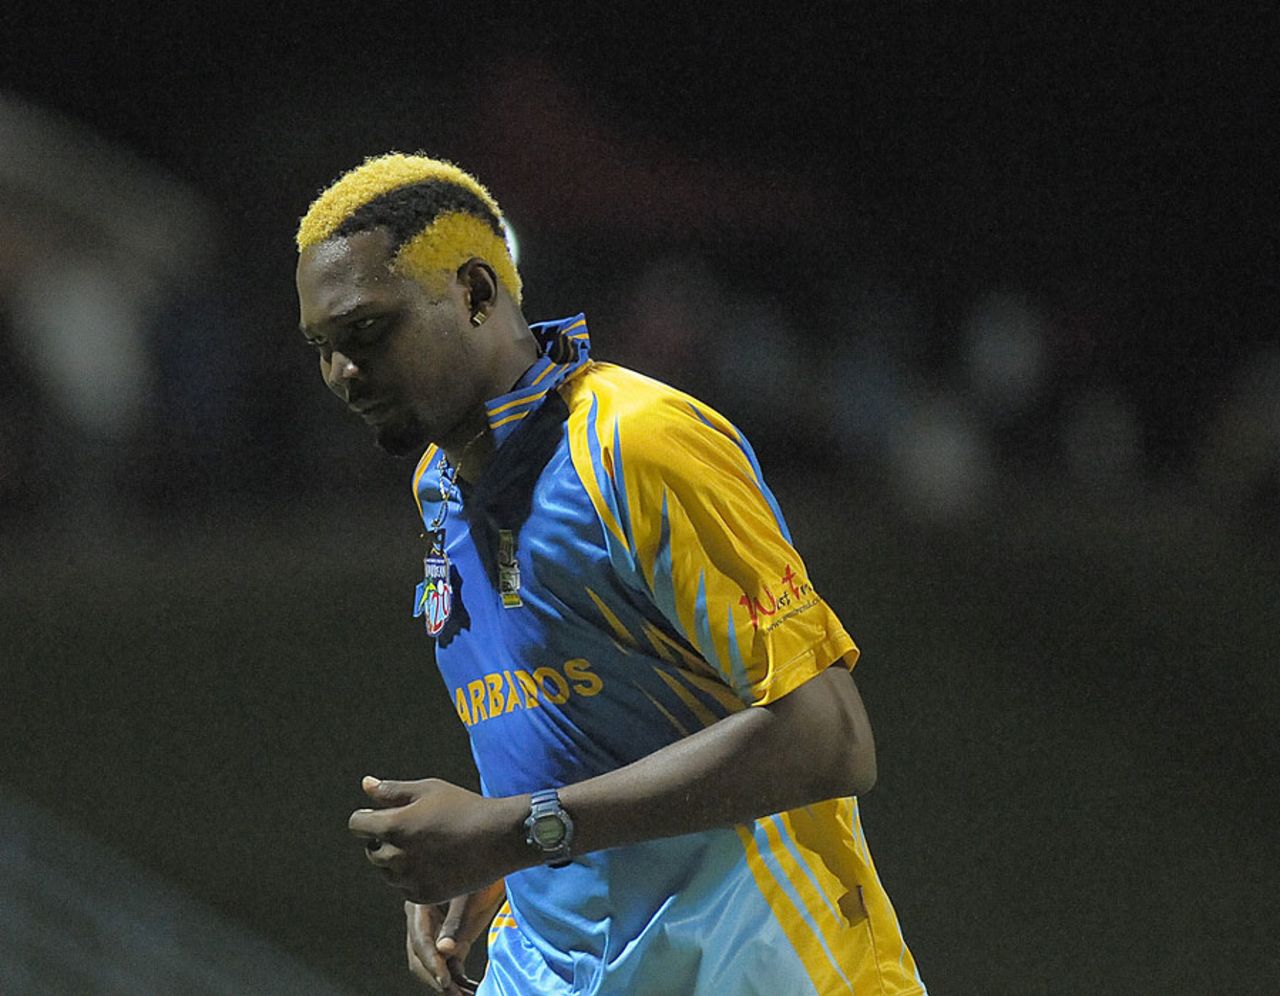 Sulieman Benn sports a whacky hairdo in the Caribbean T20, Barbados v Netherlands, Caribbean T20 2011-12, Group B match, North Sound, Antigua, January 12, 2012